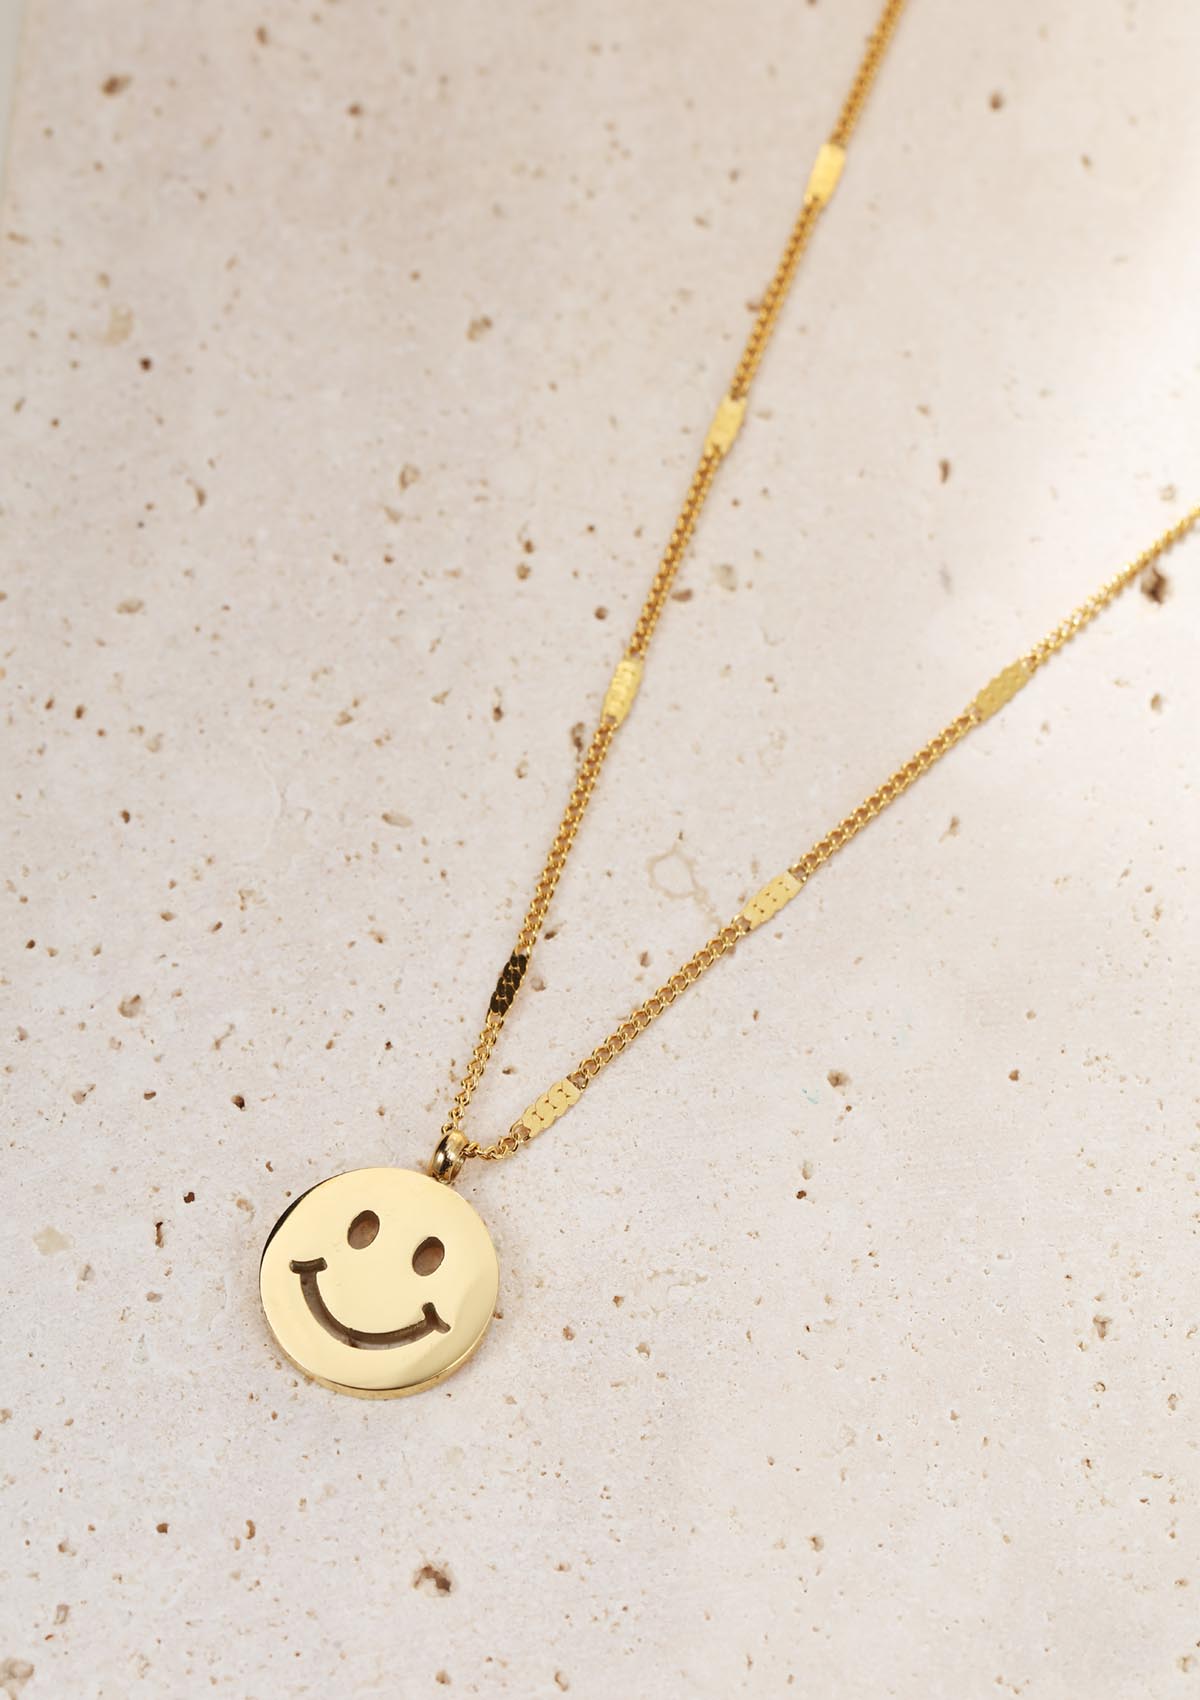 Smiley Face Pendant Necklace Sterling Silver Gold